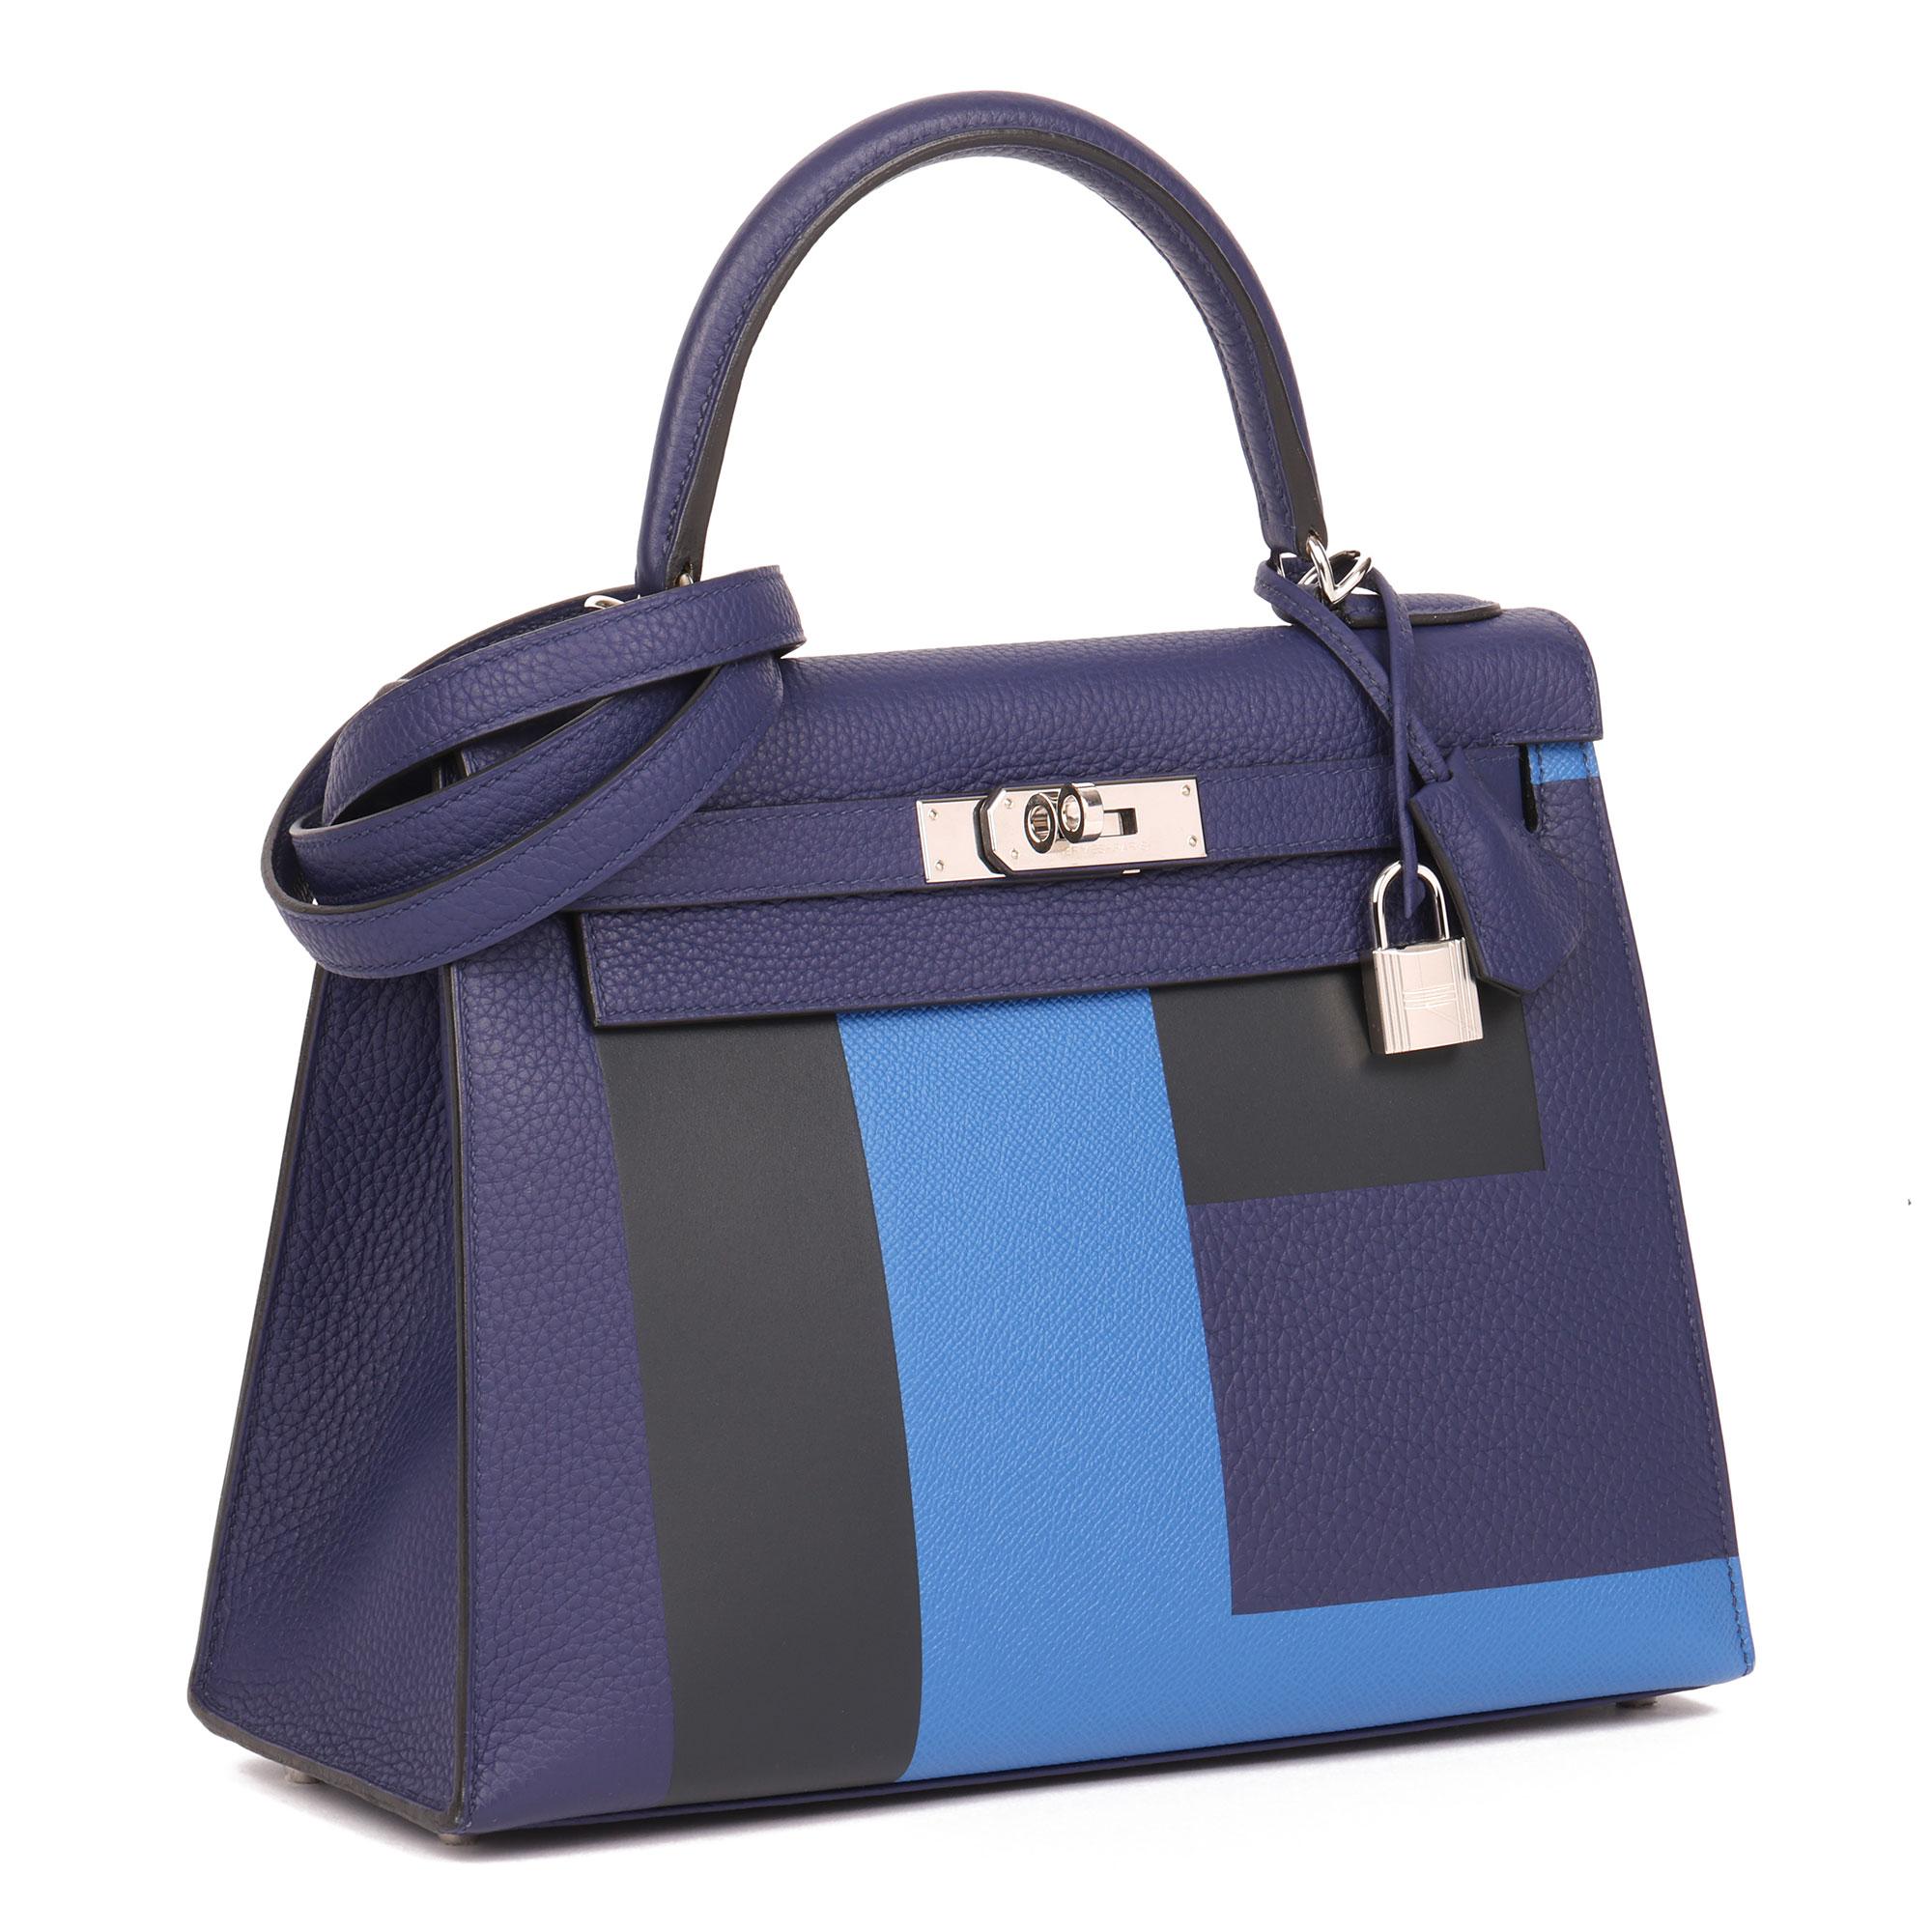 HERMÈS
Blue Encre, Blue Zellige, Black, Vert Cypress, Clemence, Epsom & Sombrero Leather Kellygraphie Lettre E Kelly 28cm Sellier

Xupes Reference: CB479
Serial Number: C
Age (Circa): 2018
Accompanied By: Hermès Dust Bag, Box, Lock, Keys, Clochette,